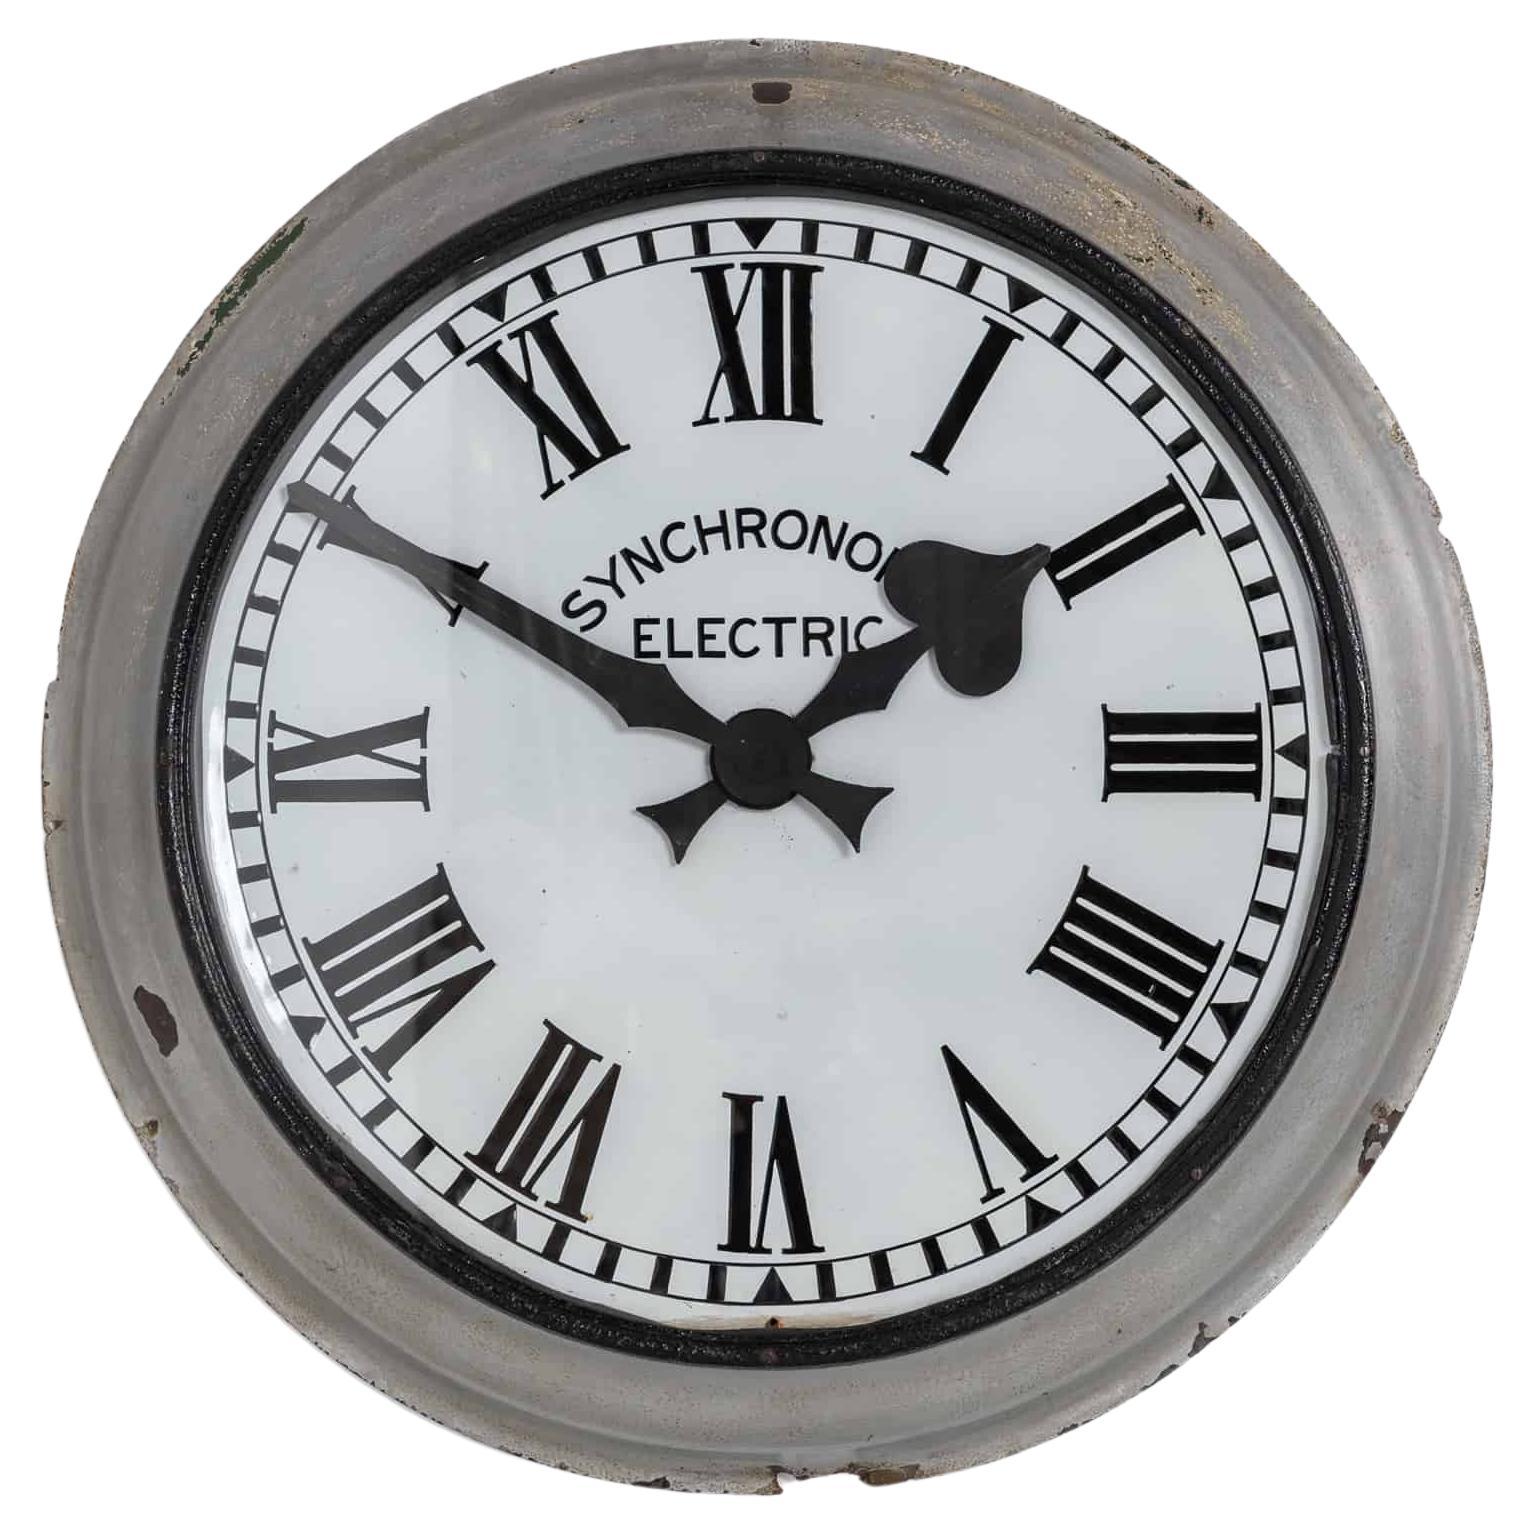 HUGE Vintage Industrial Synchronome Factory Wall Clock, c.1930